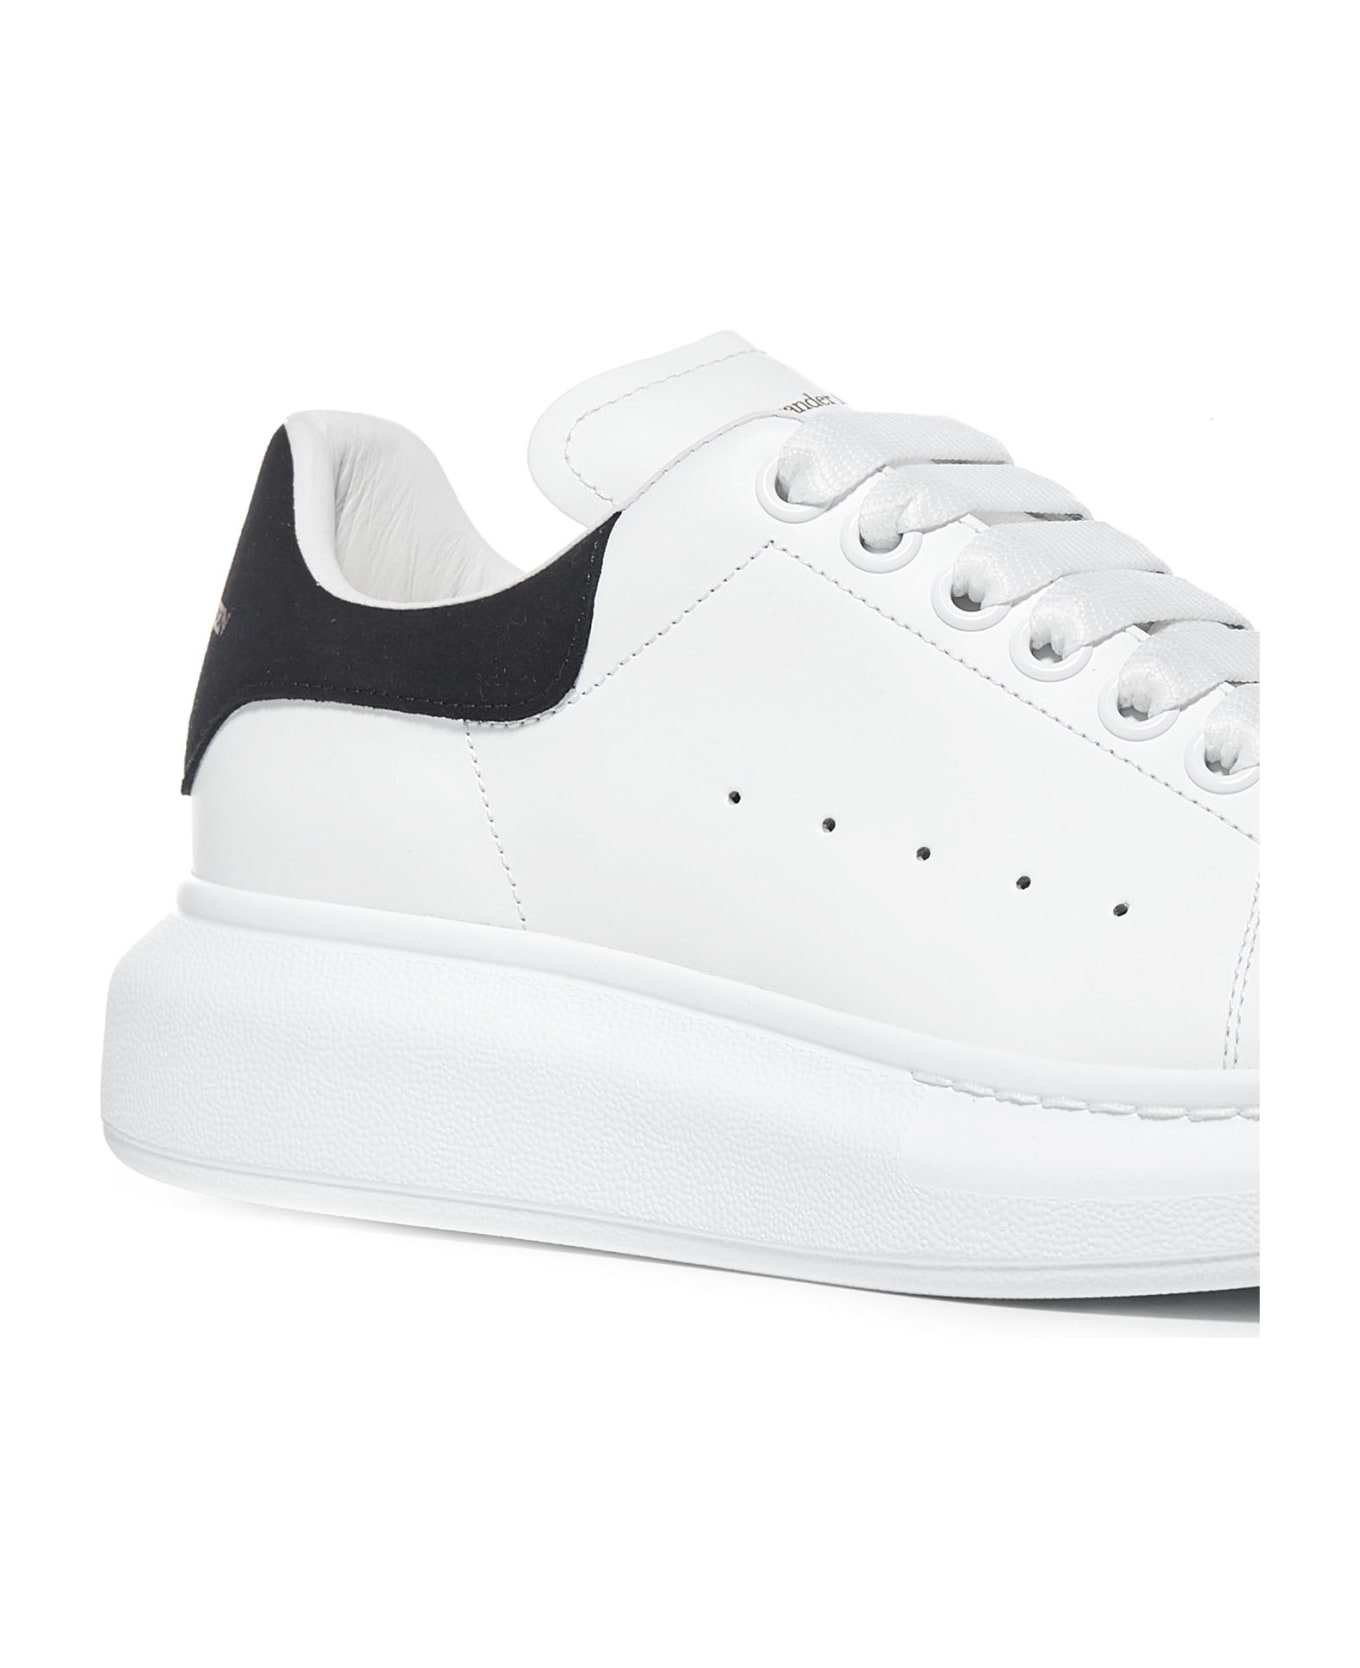 Oversized Sneakers In Leather With Contrasting Heel Tab - 4